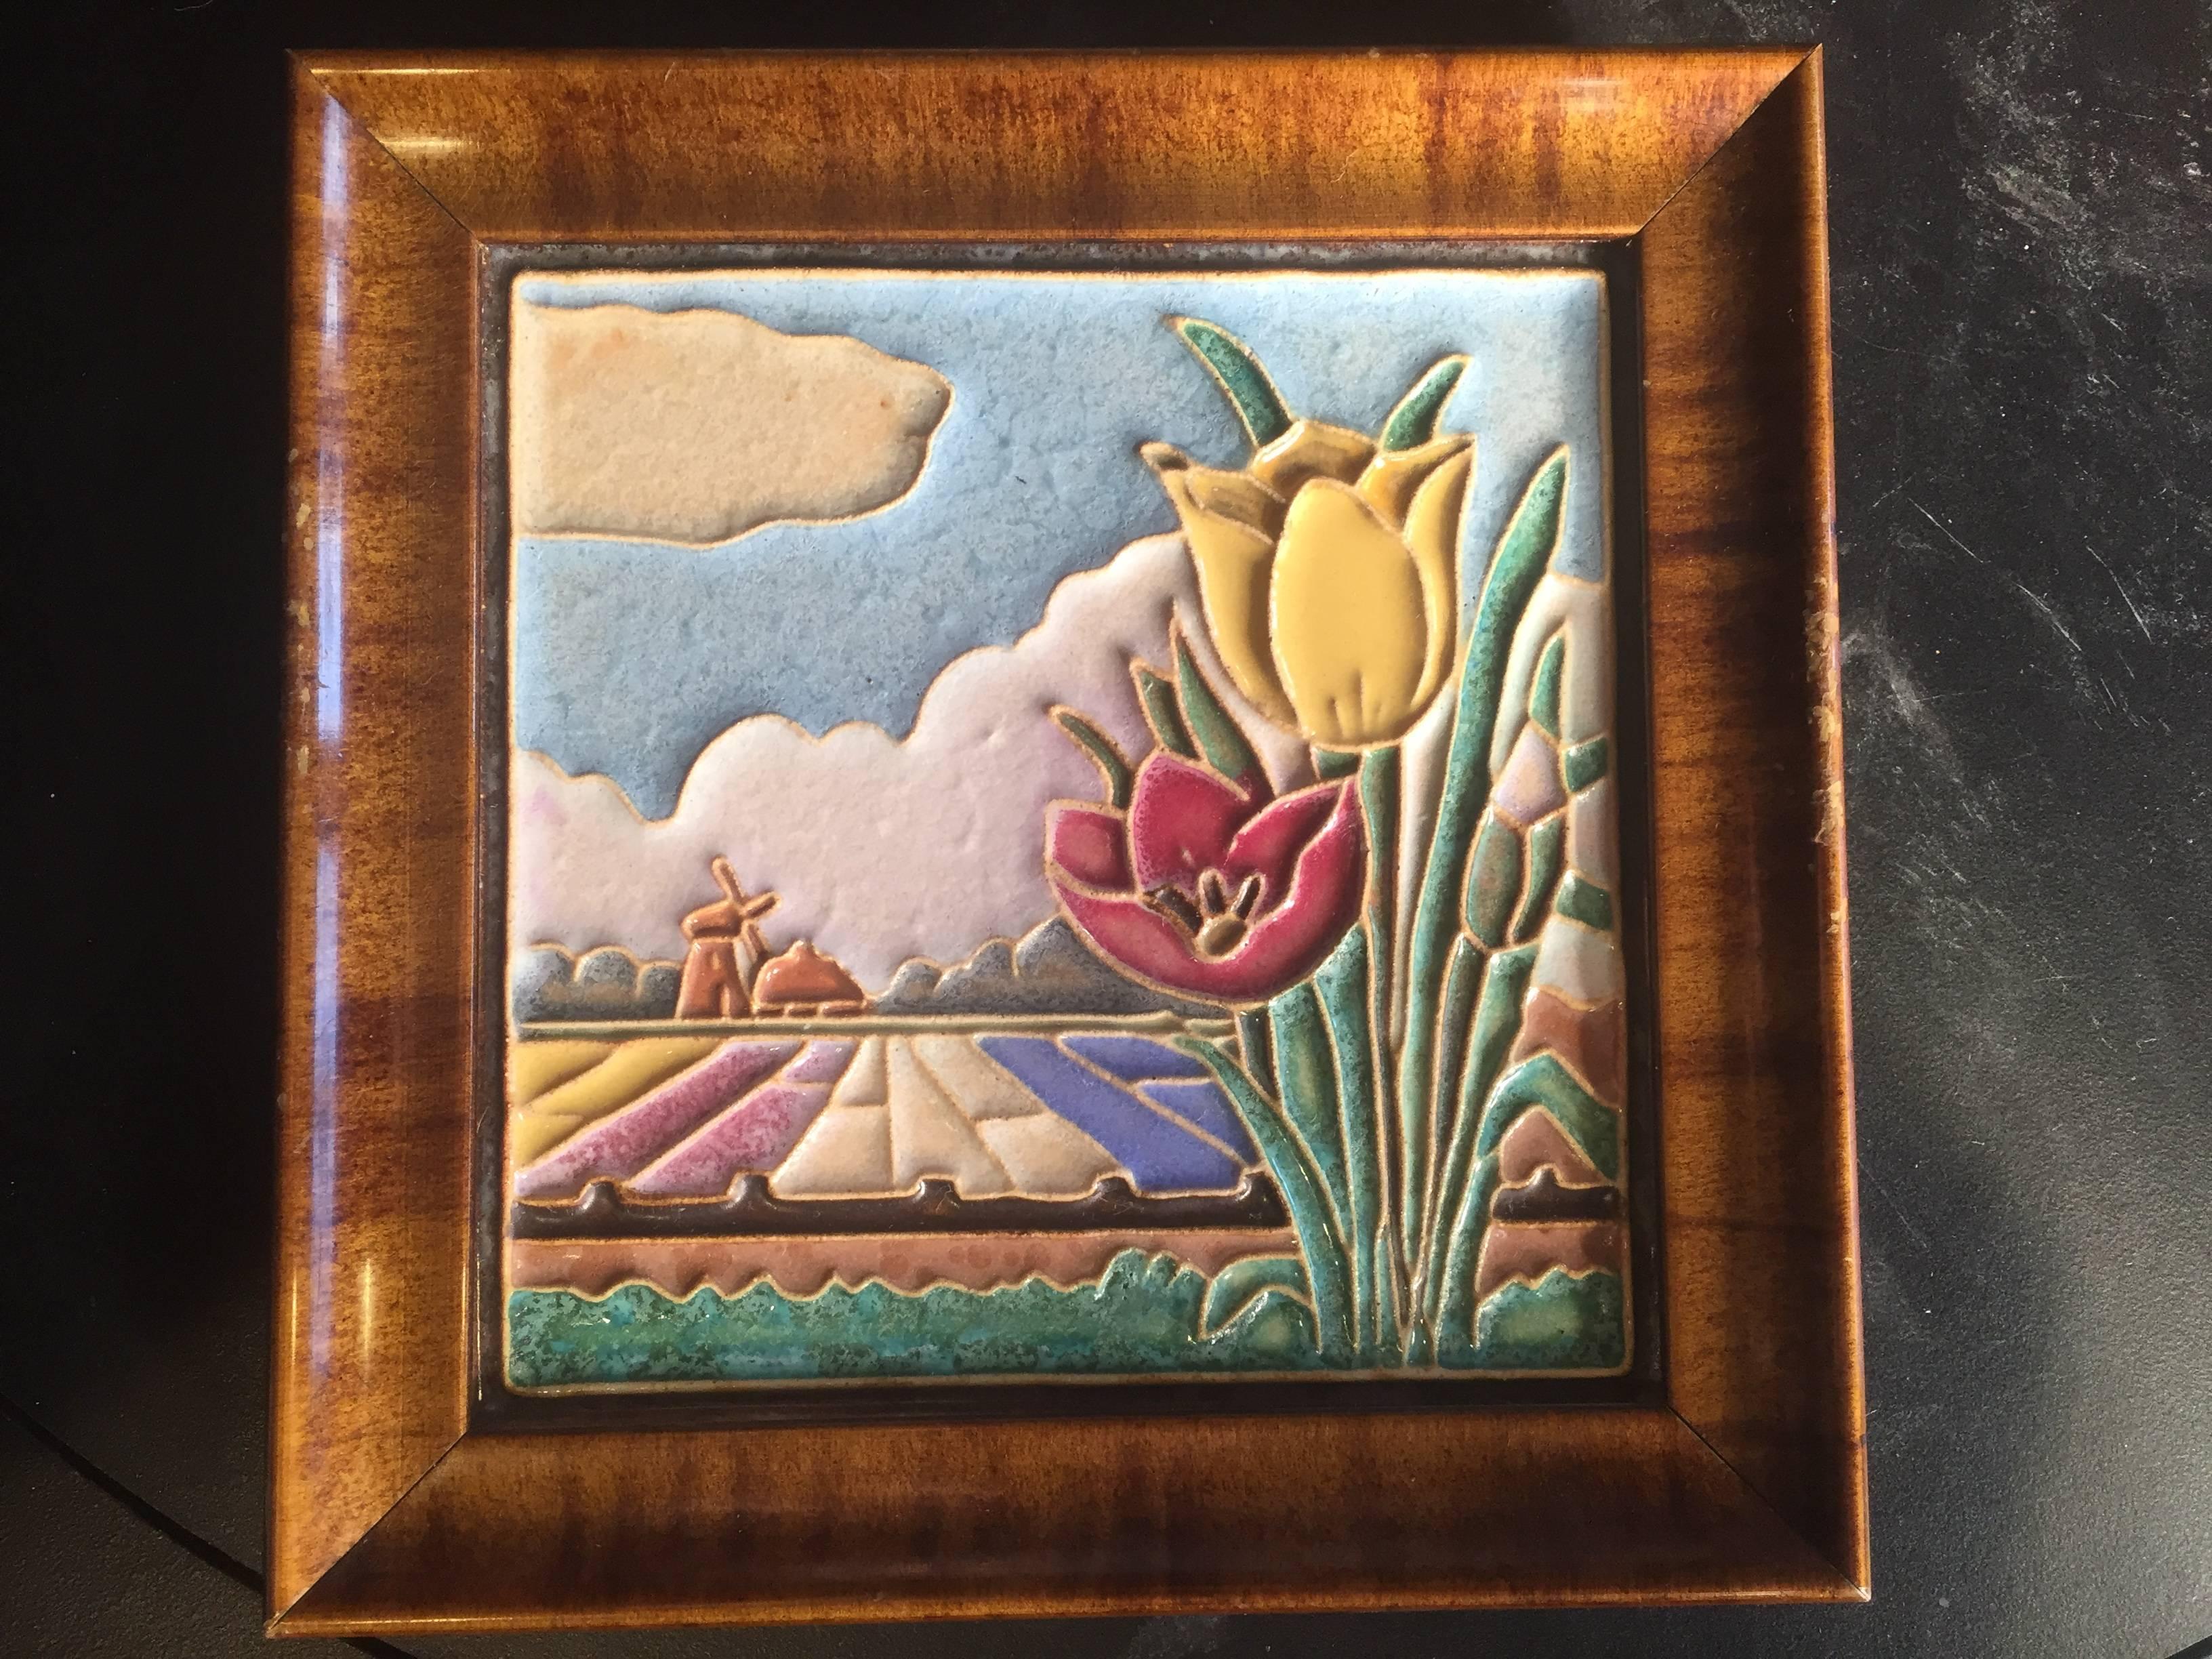 Here's a fine collection of three lovely framed hand-painted and hand glazed delft flower themed ceramic tiles dating to the mid last century including beautiful daisies, tulips, and nostalgic decor.

Dimensions: Each tile approximately 5 inches